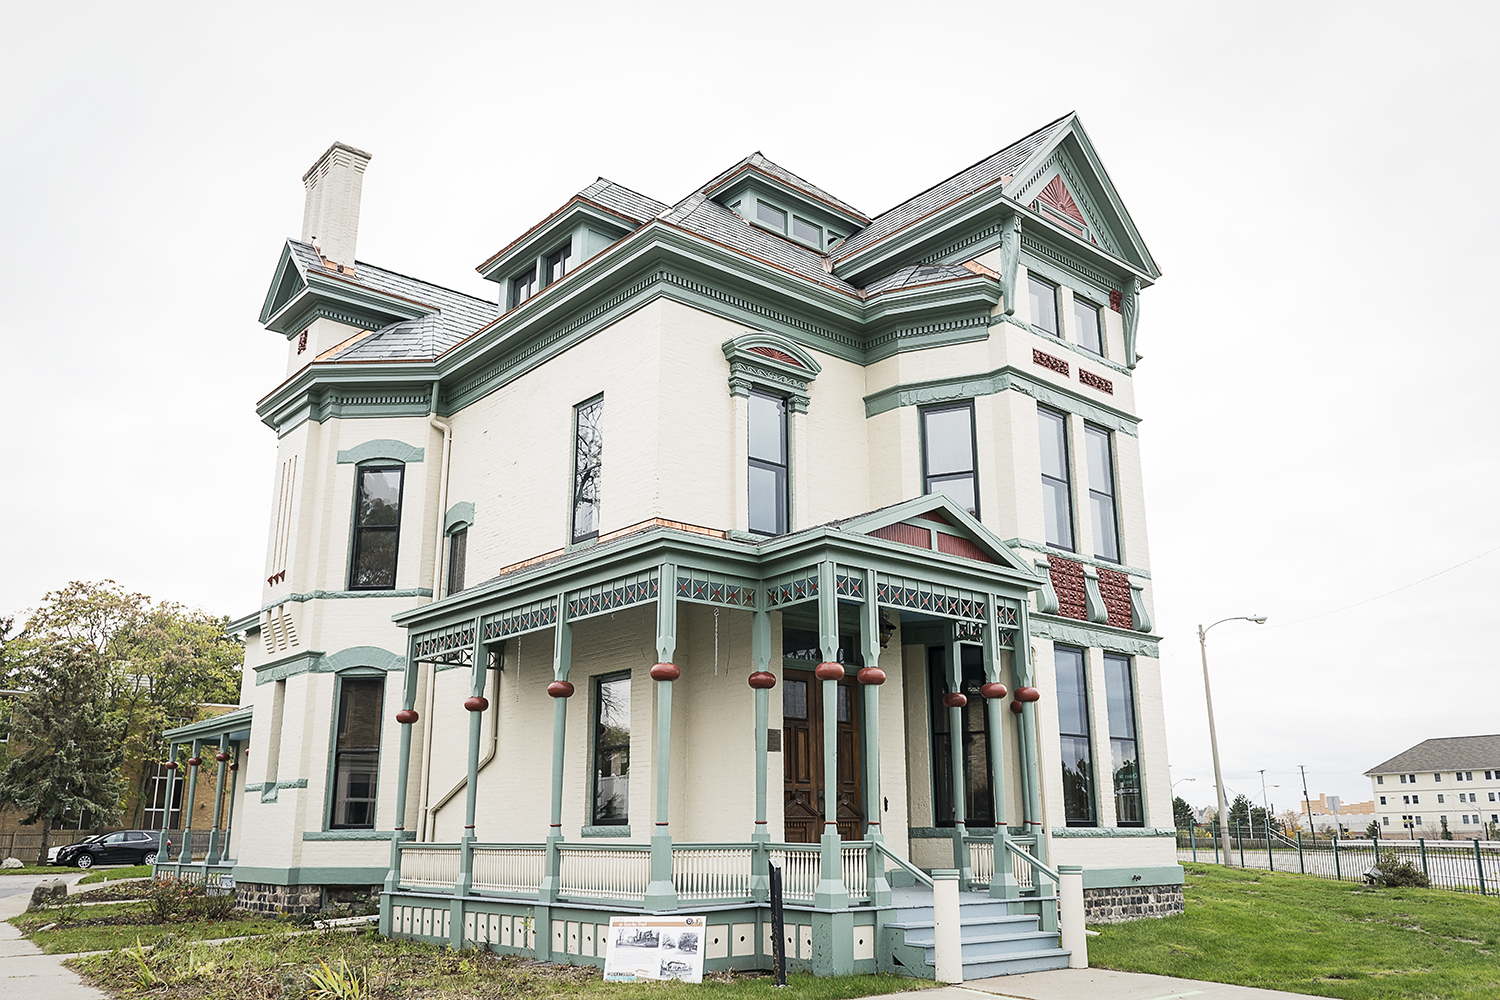 Flint, MI - Tuesday, October 31, 2017: The Whaley Historic House Museum sits on Kearsley Street, along I-475, on a fraction of the land it was originally built on. Kearsley Street was home to many of the influential families of Flint including the Do